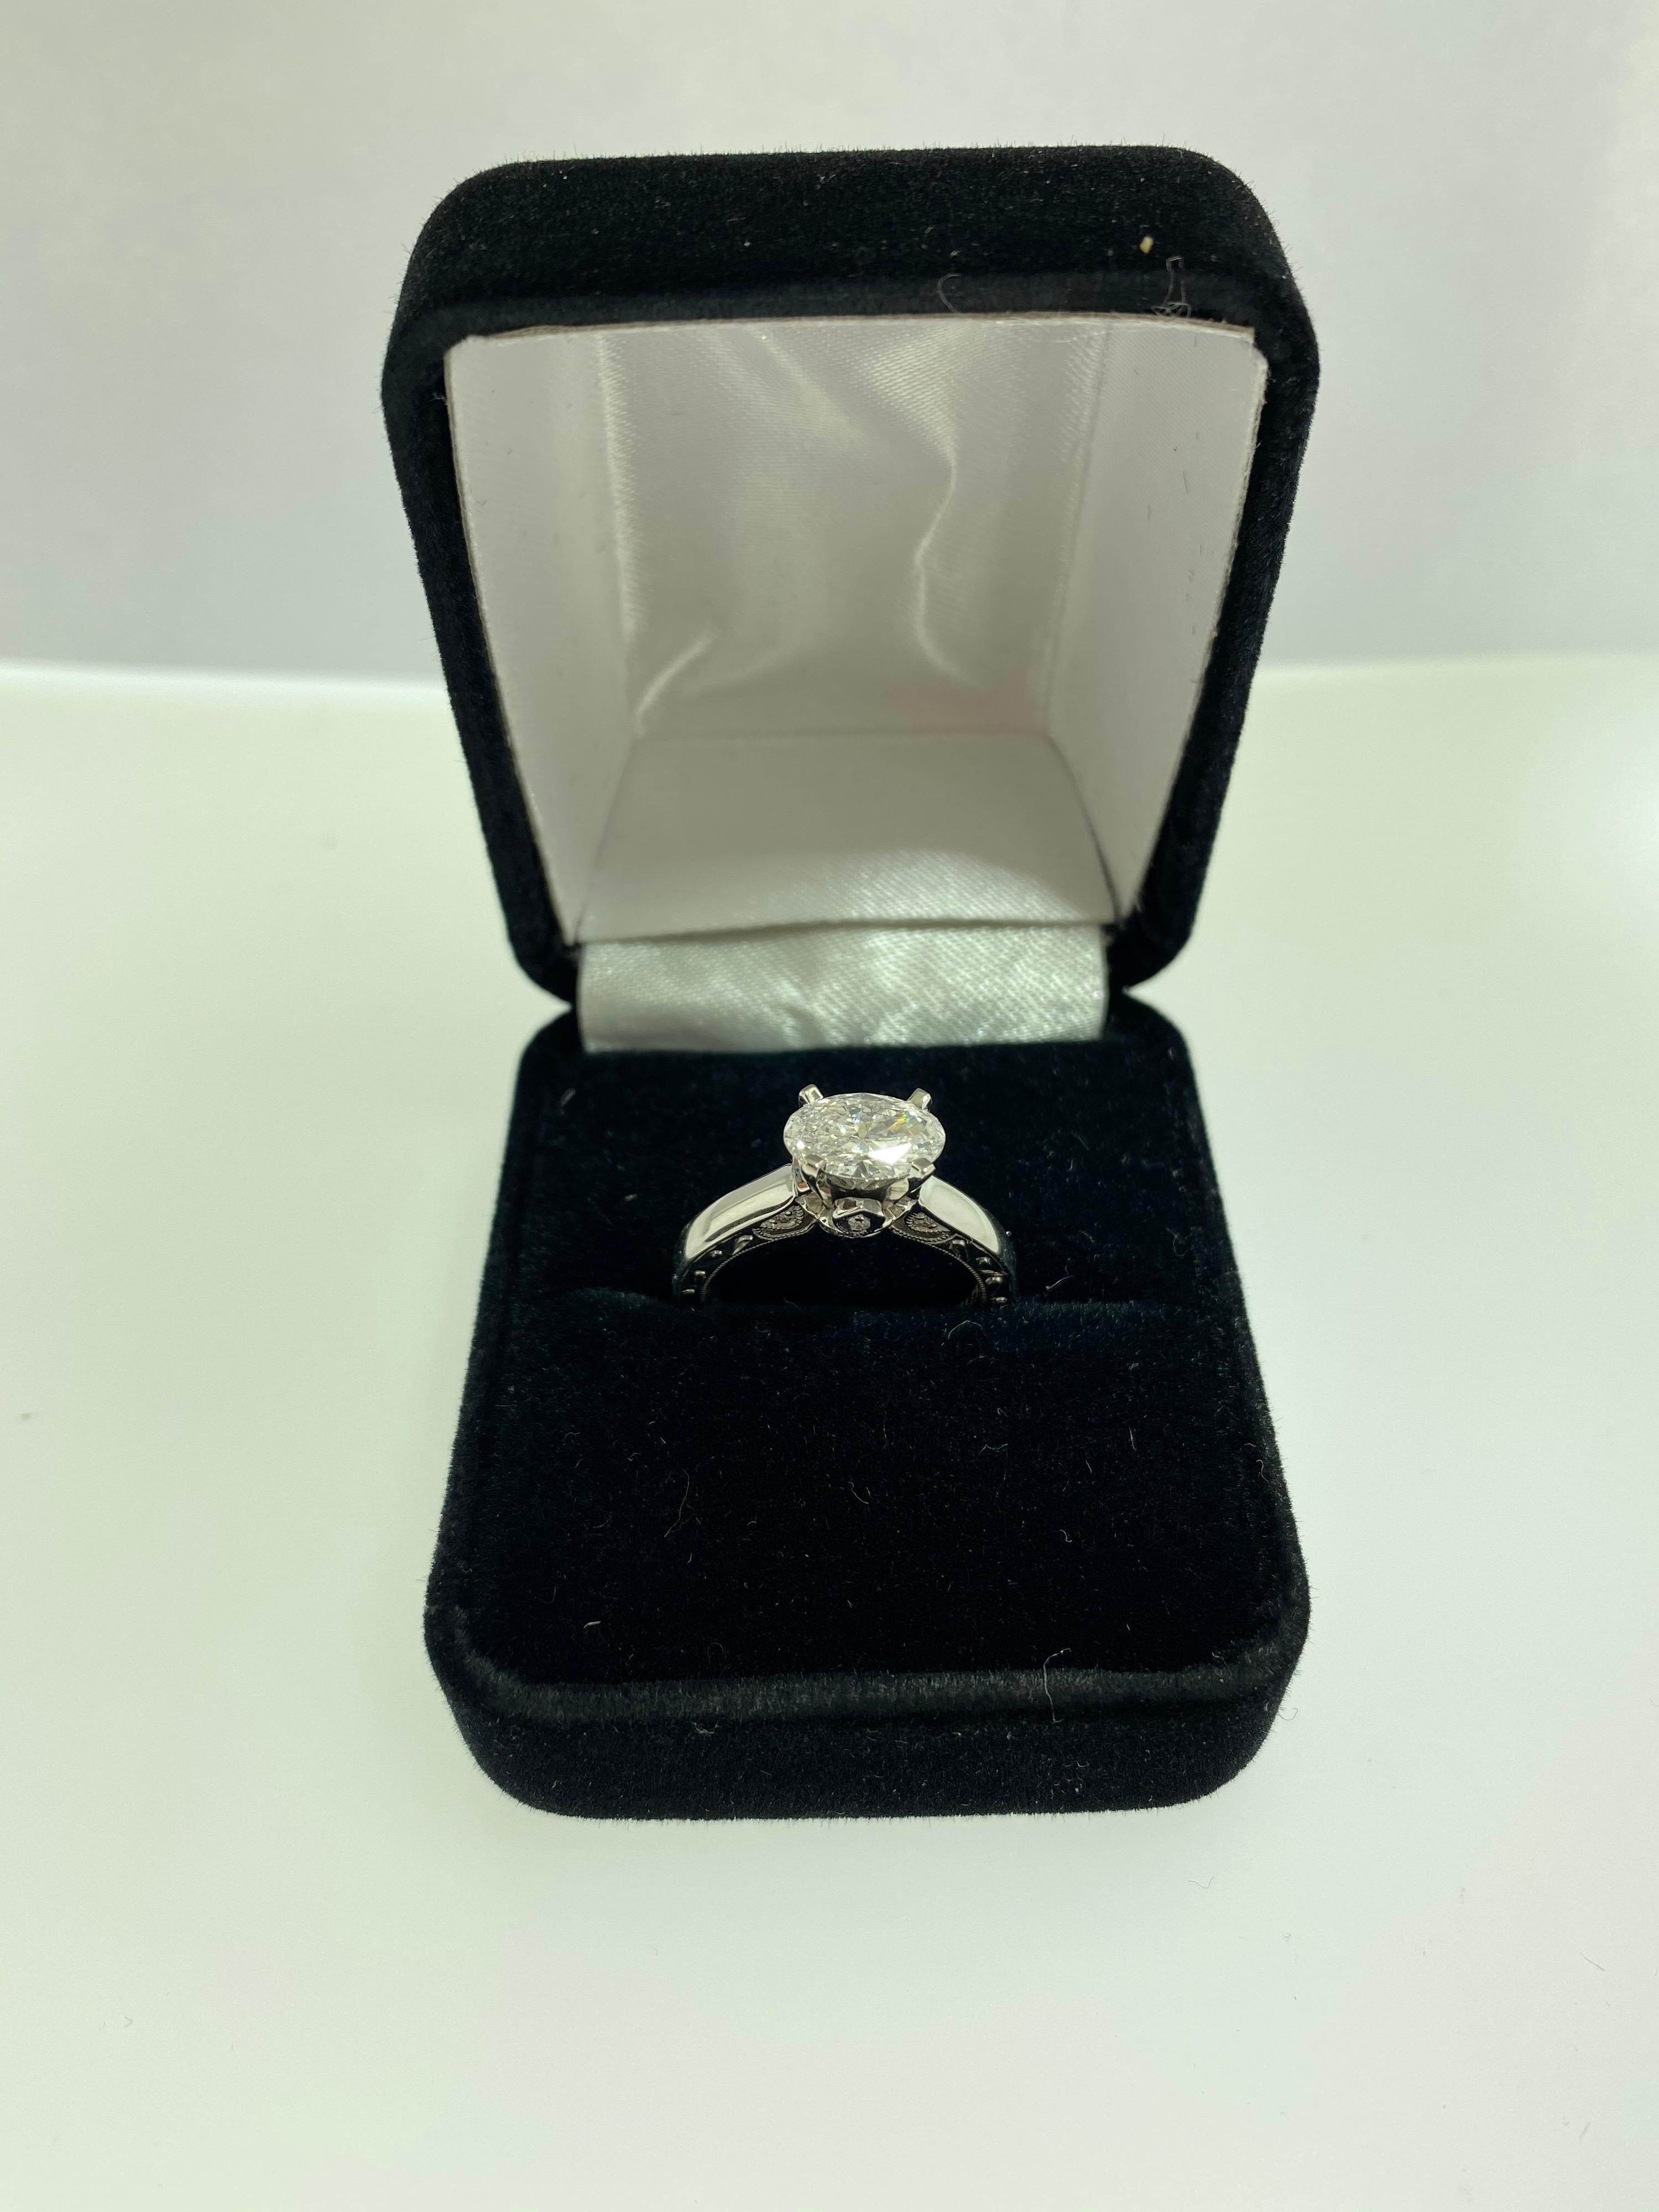 Crafted in14K White Gold ring with GIA certified Oval Cut Diamond F color SI2 clarity. 
GIA report no. 2211439321

Viewings available in our NYC wholesale office by appointment.
Please contact us for more information.

All items sold are accompanied